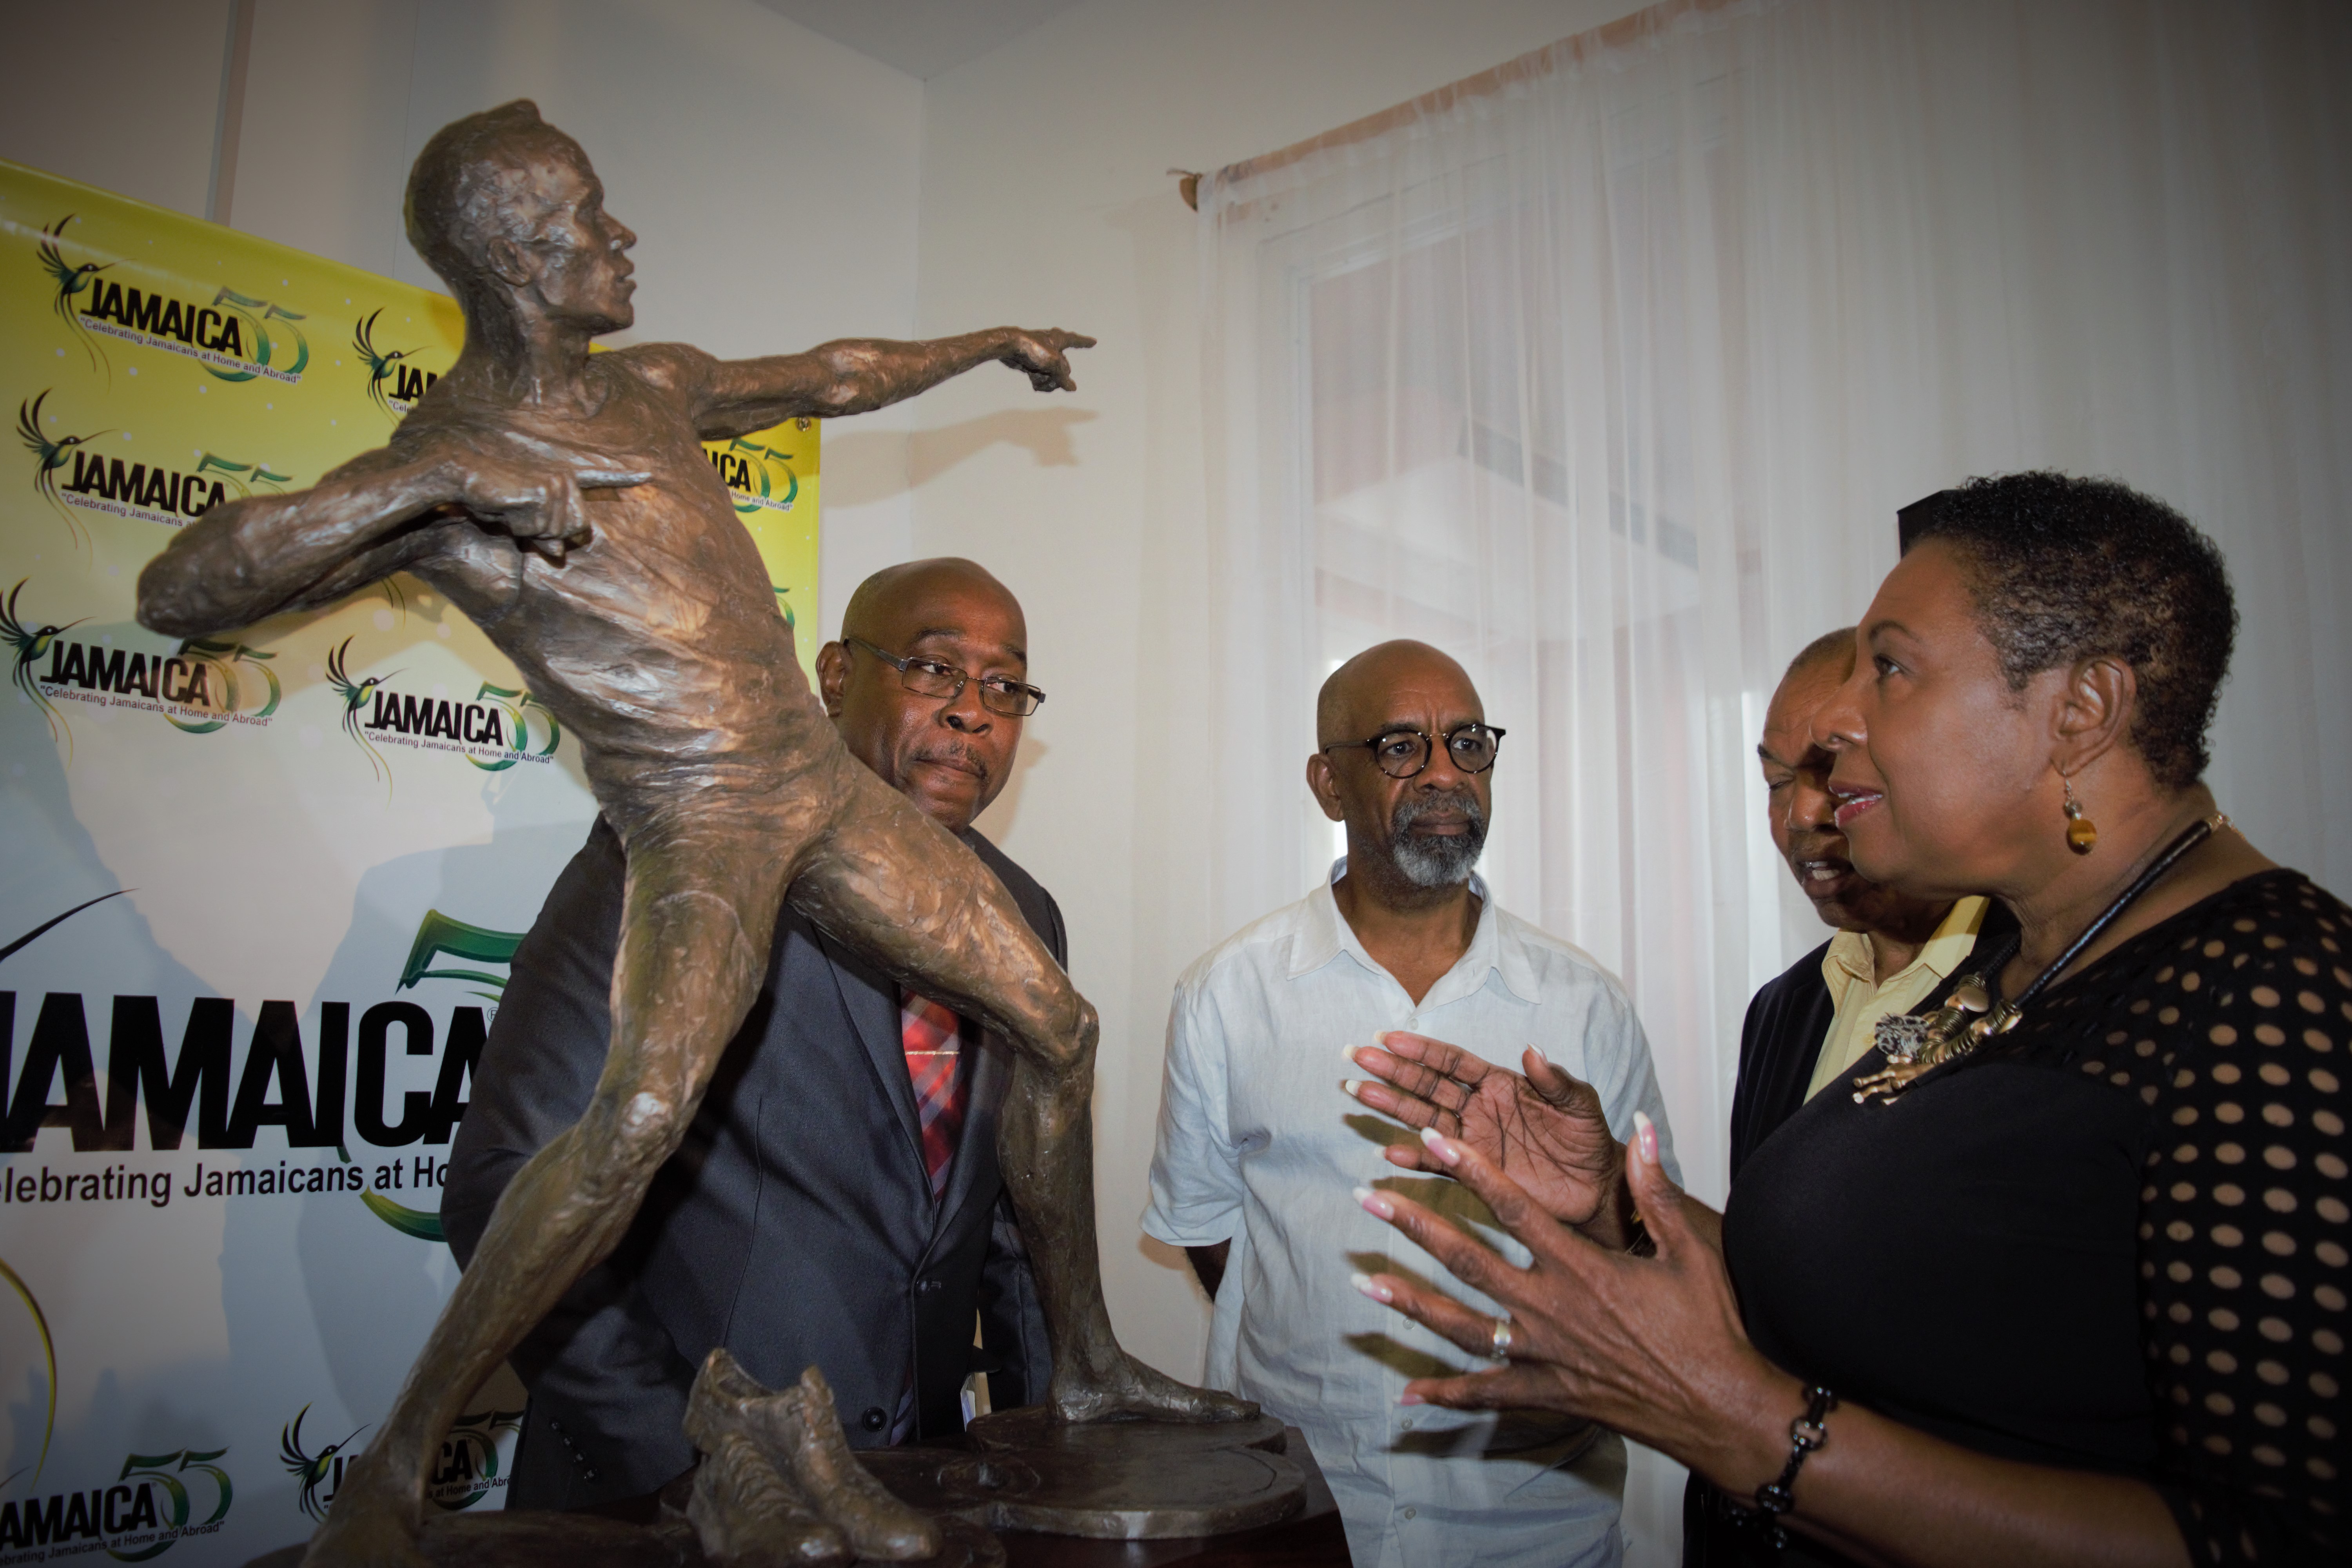 Usain Bolt to get statue in Trelawny by December 2020